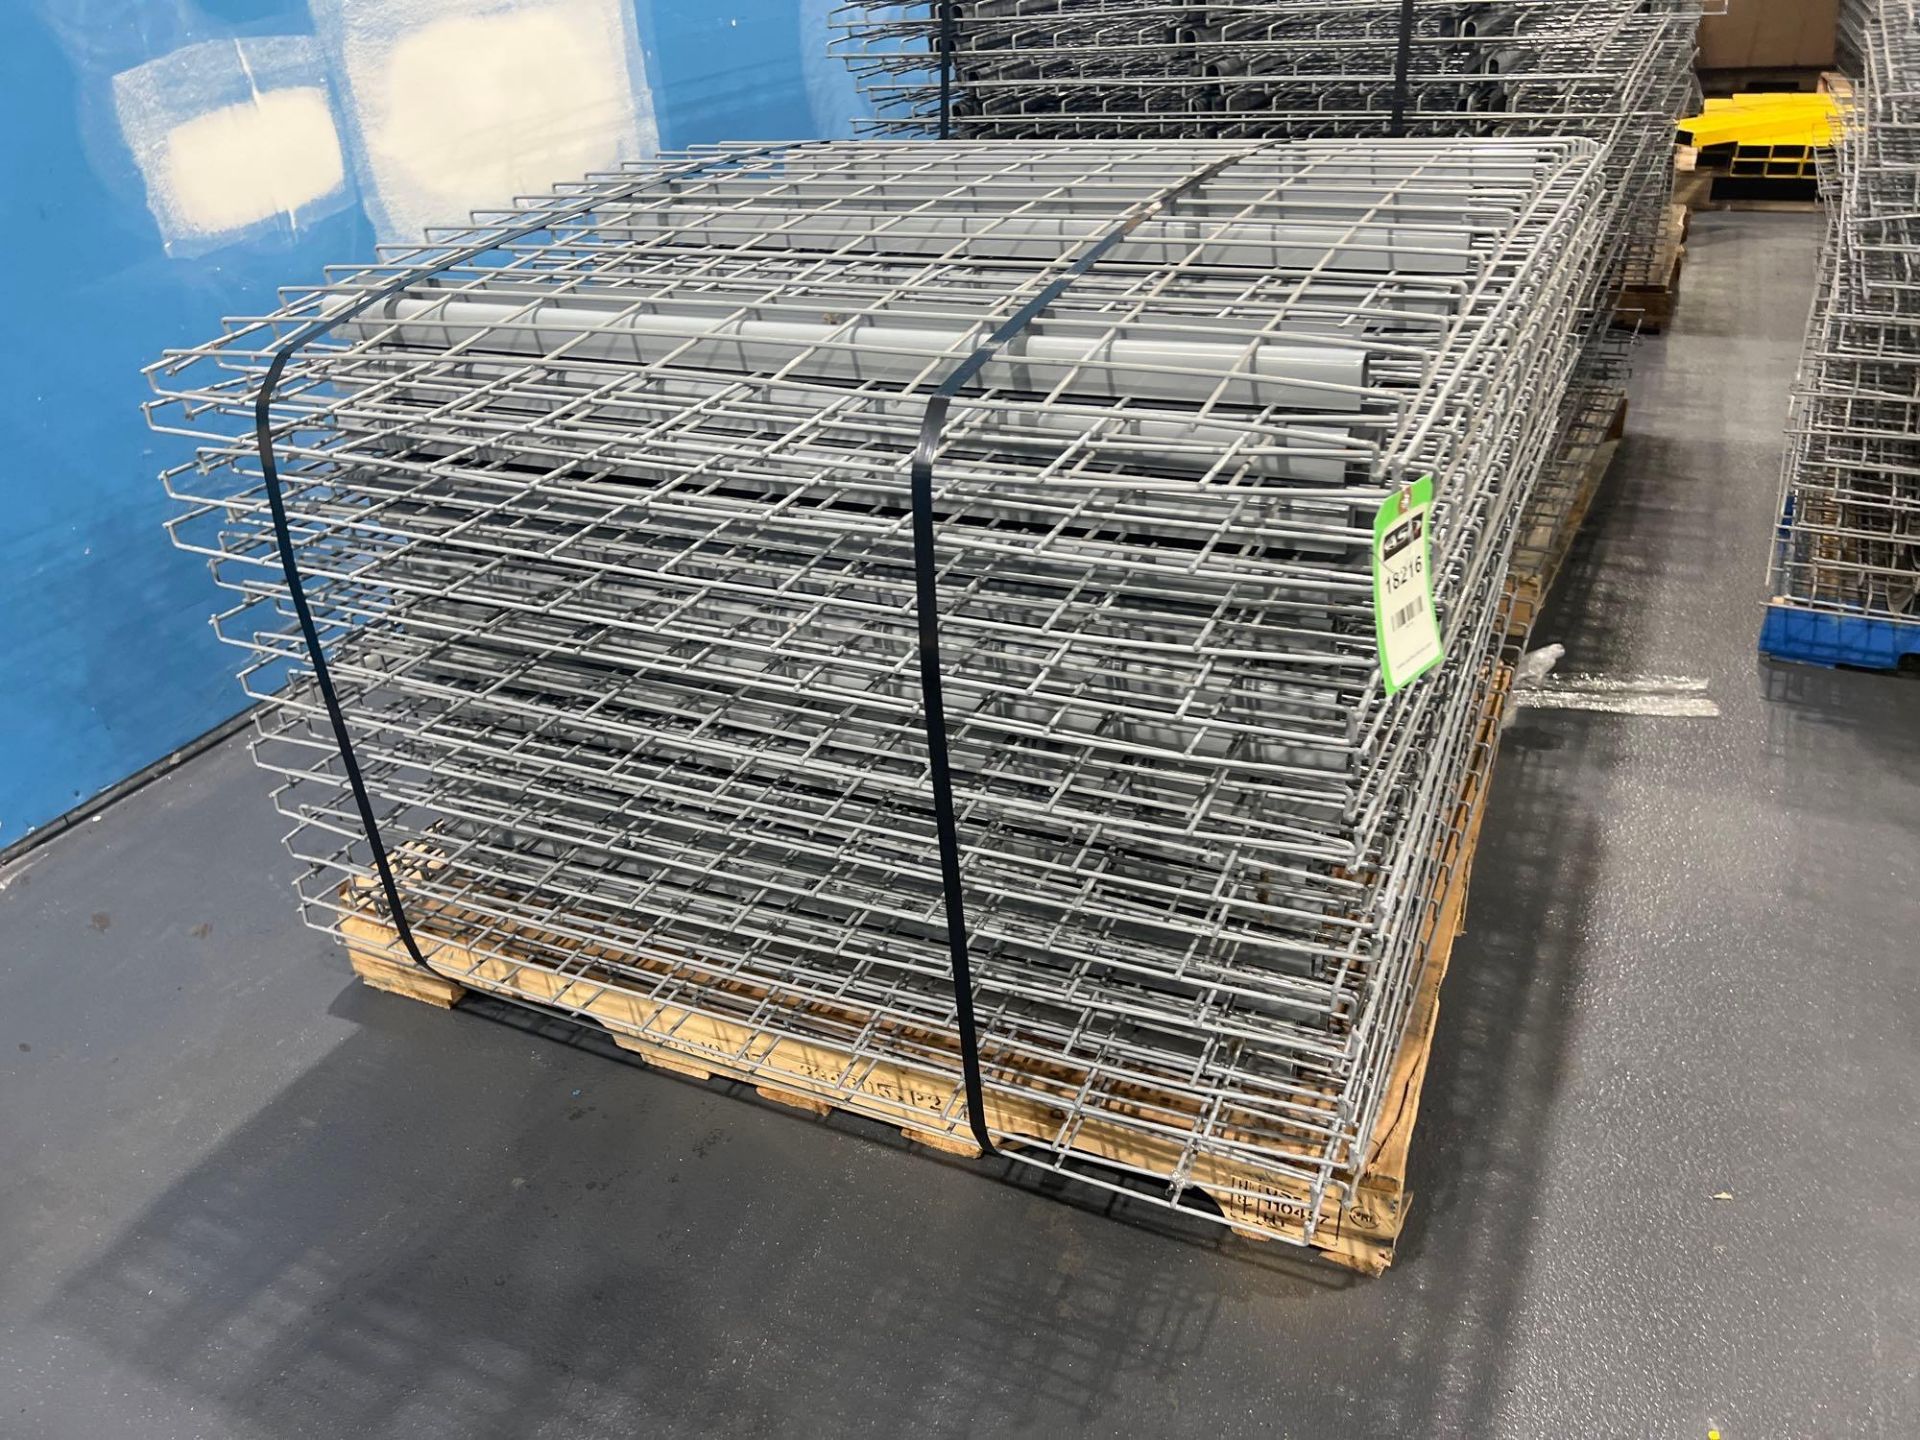 PALLET OF APPROX. 25 WIRE GRATES FOR PALLET RACKING, APPROX. DIMENSIONS 43" X 45" - Image 2 of 4